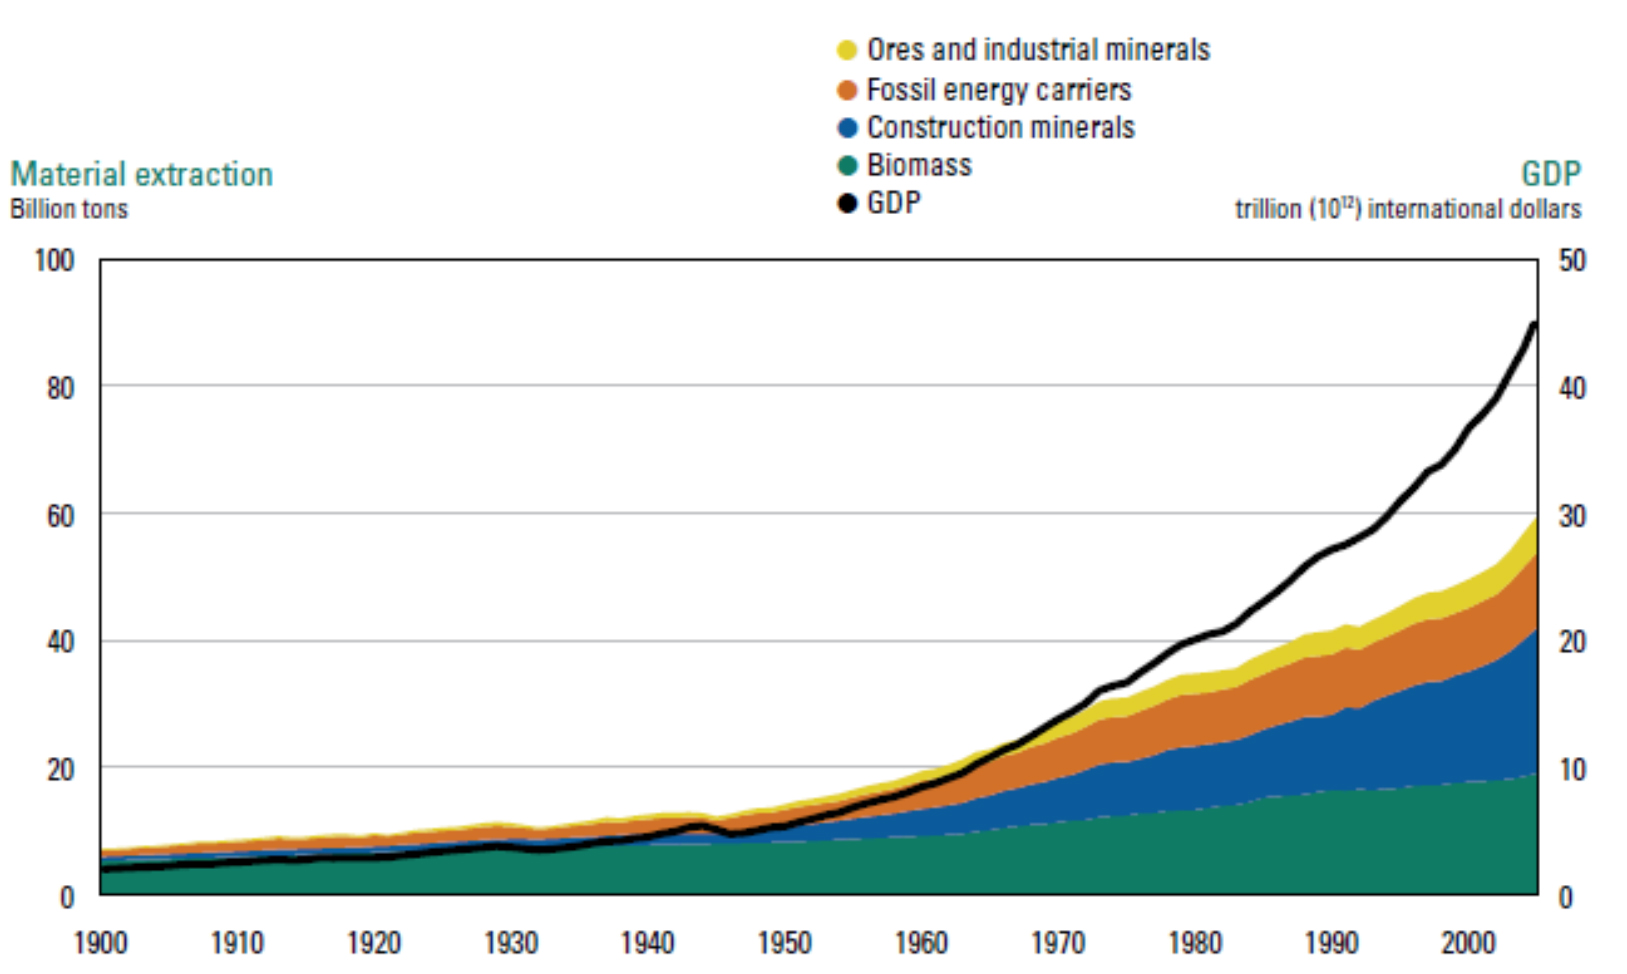 Global udvinding af materialer i mia. tons, 1900-2005. Kilde: Krausmann et al. 2009 “Growth in global materials use, GDP and population during the 20th century”, Ecological Economics. Her taget fra: United Nations Environment Programme (2011): Decoupling natural resource use and environmental impacts from economic growth.